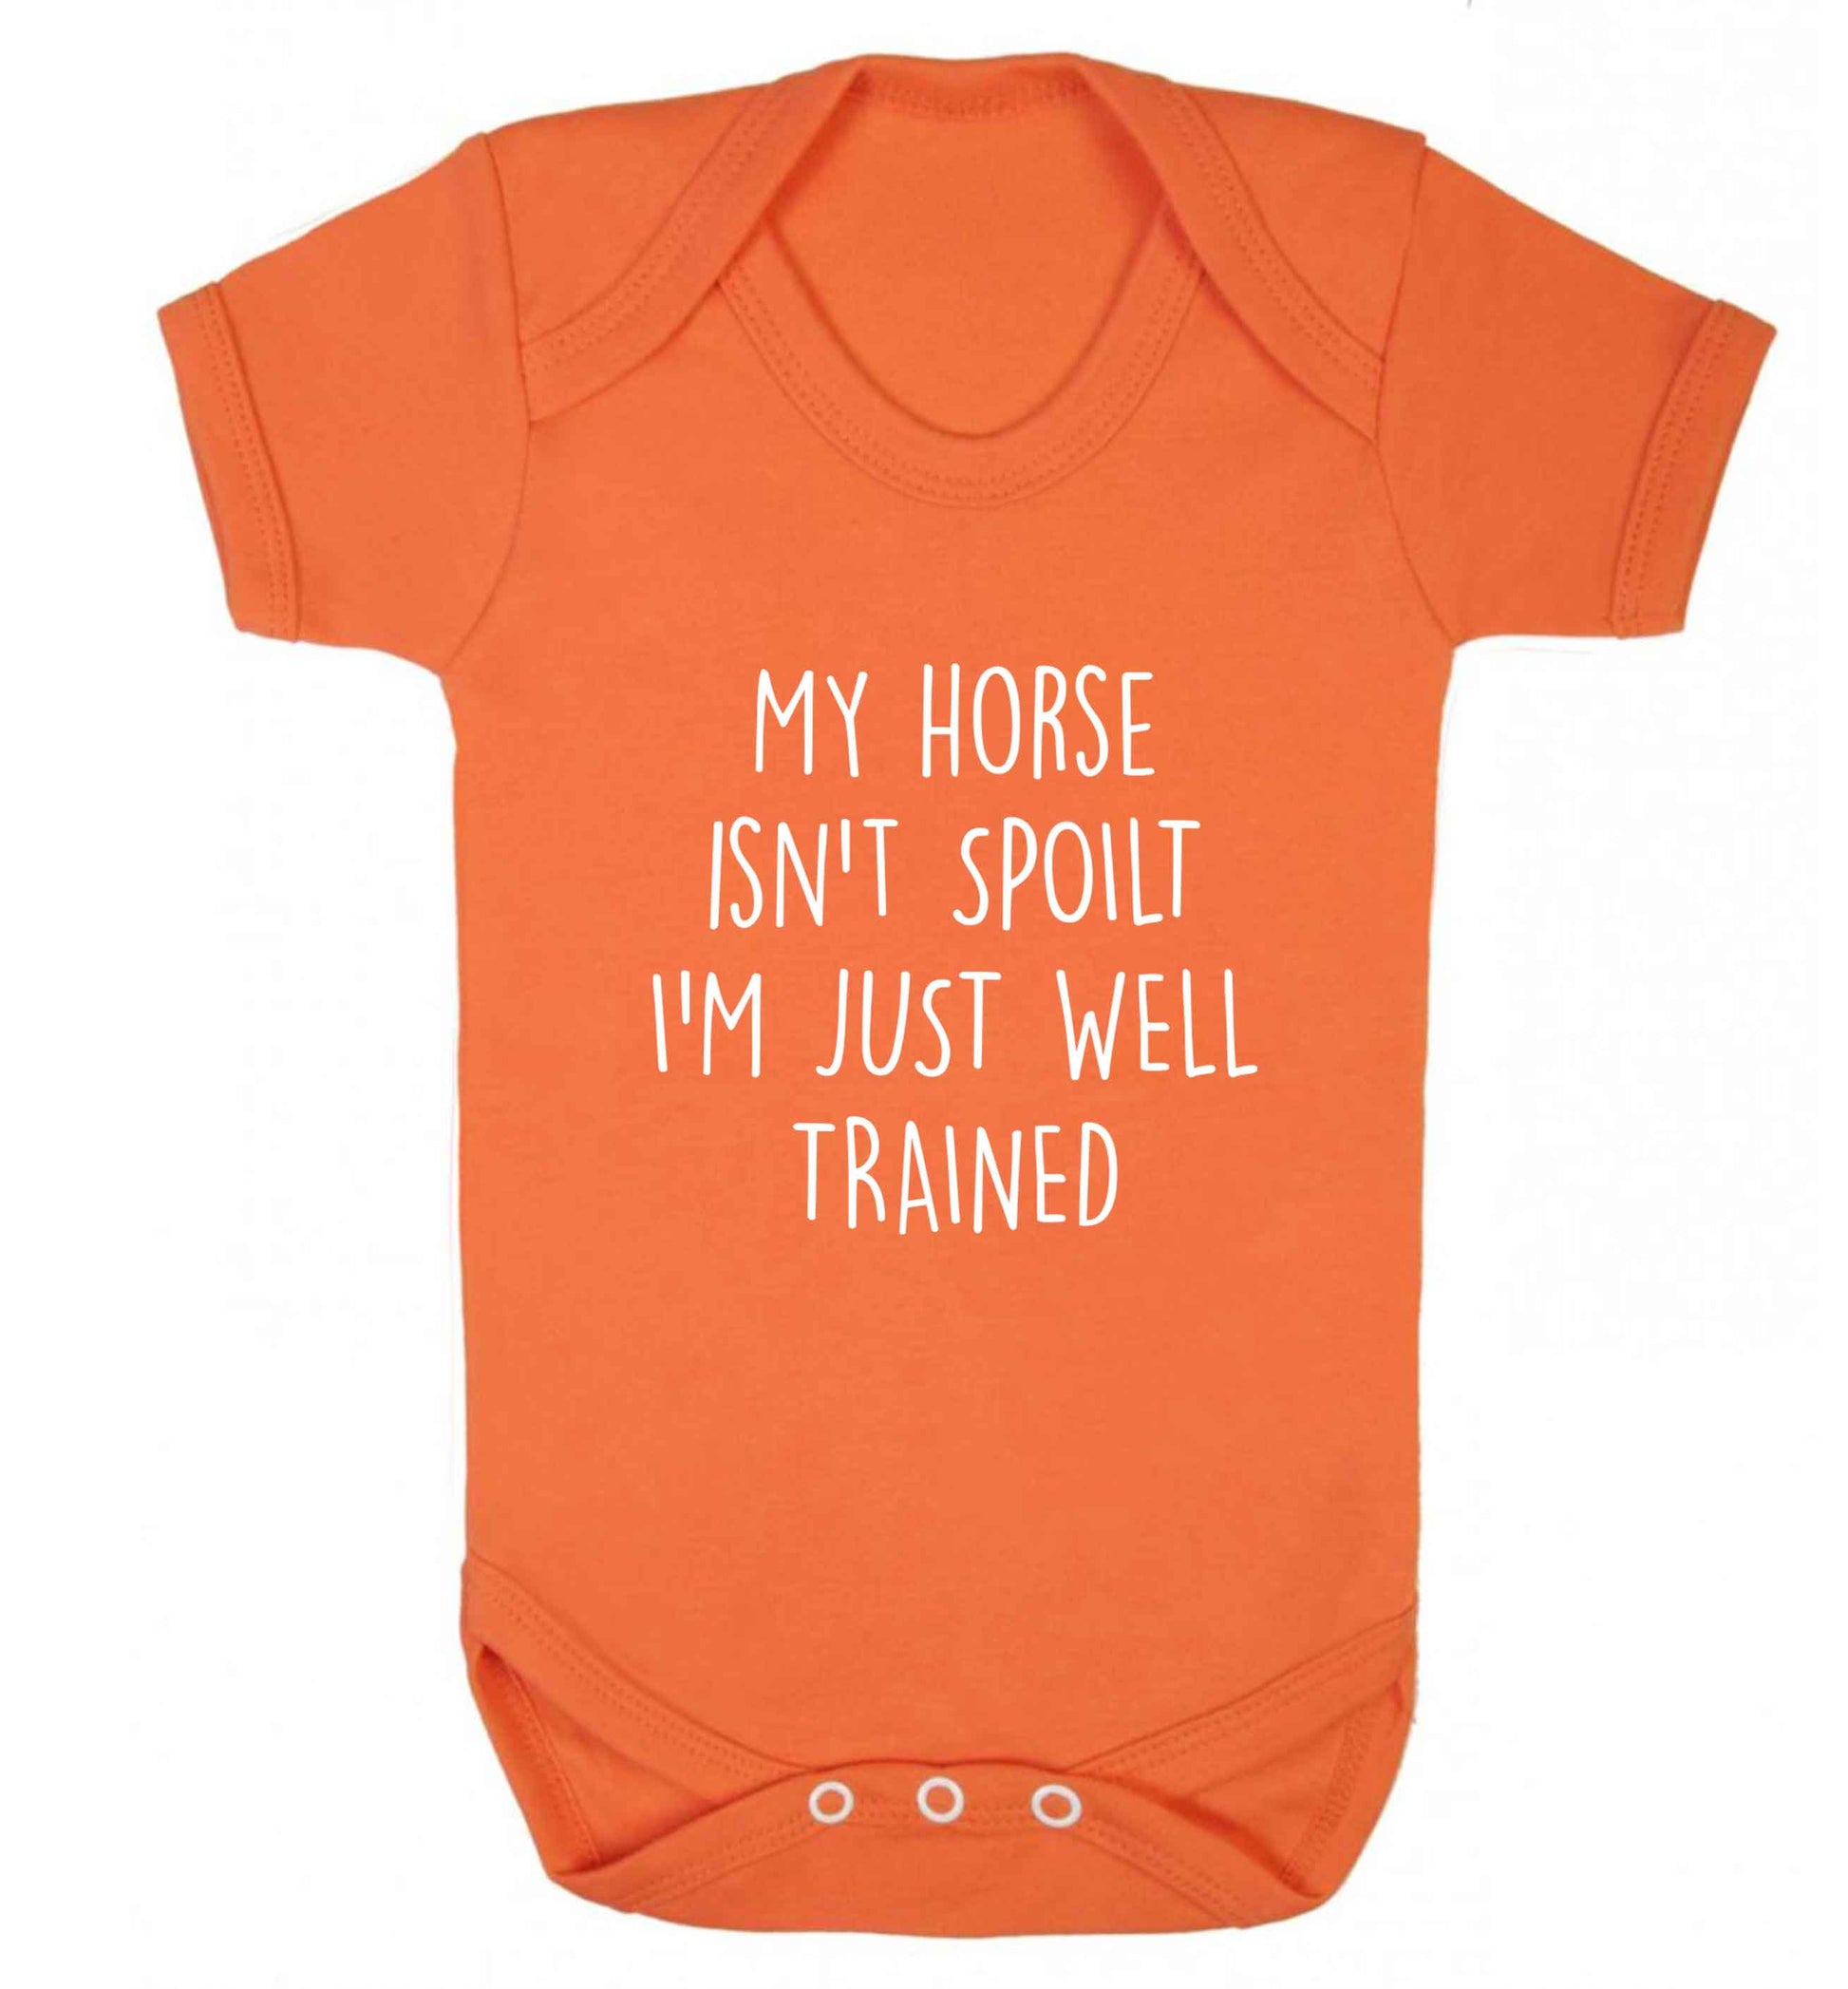 My horse isn't spoilt I'm just well trained baby vest orange 18-24 months